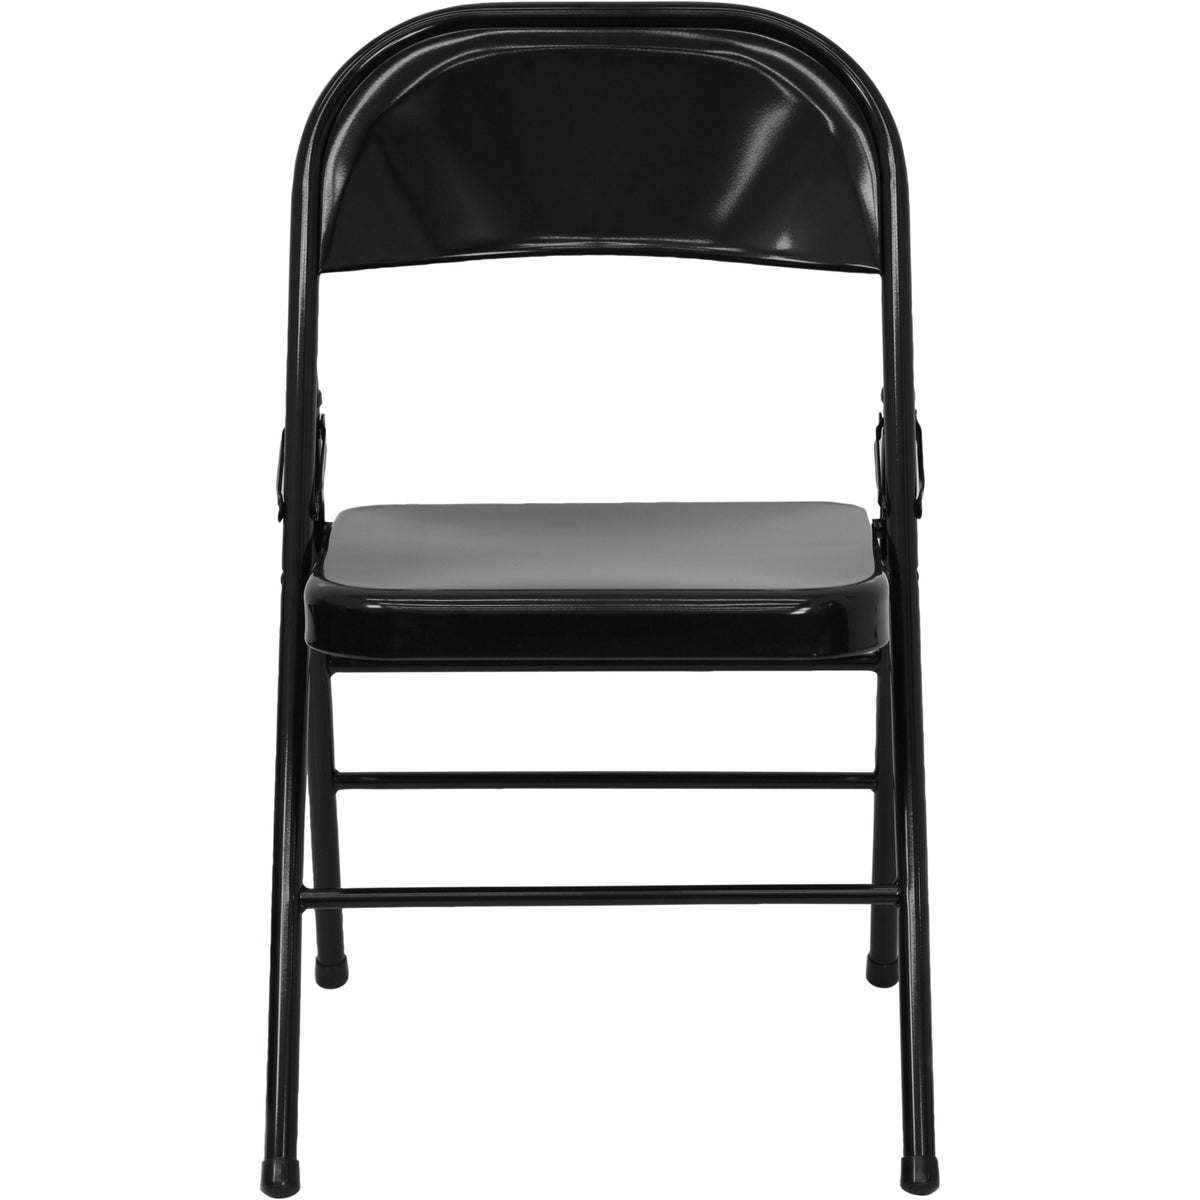 Black |#| Triple Braced & Double Hinged Black Metal Folding Chair - Commercial Chair